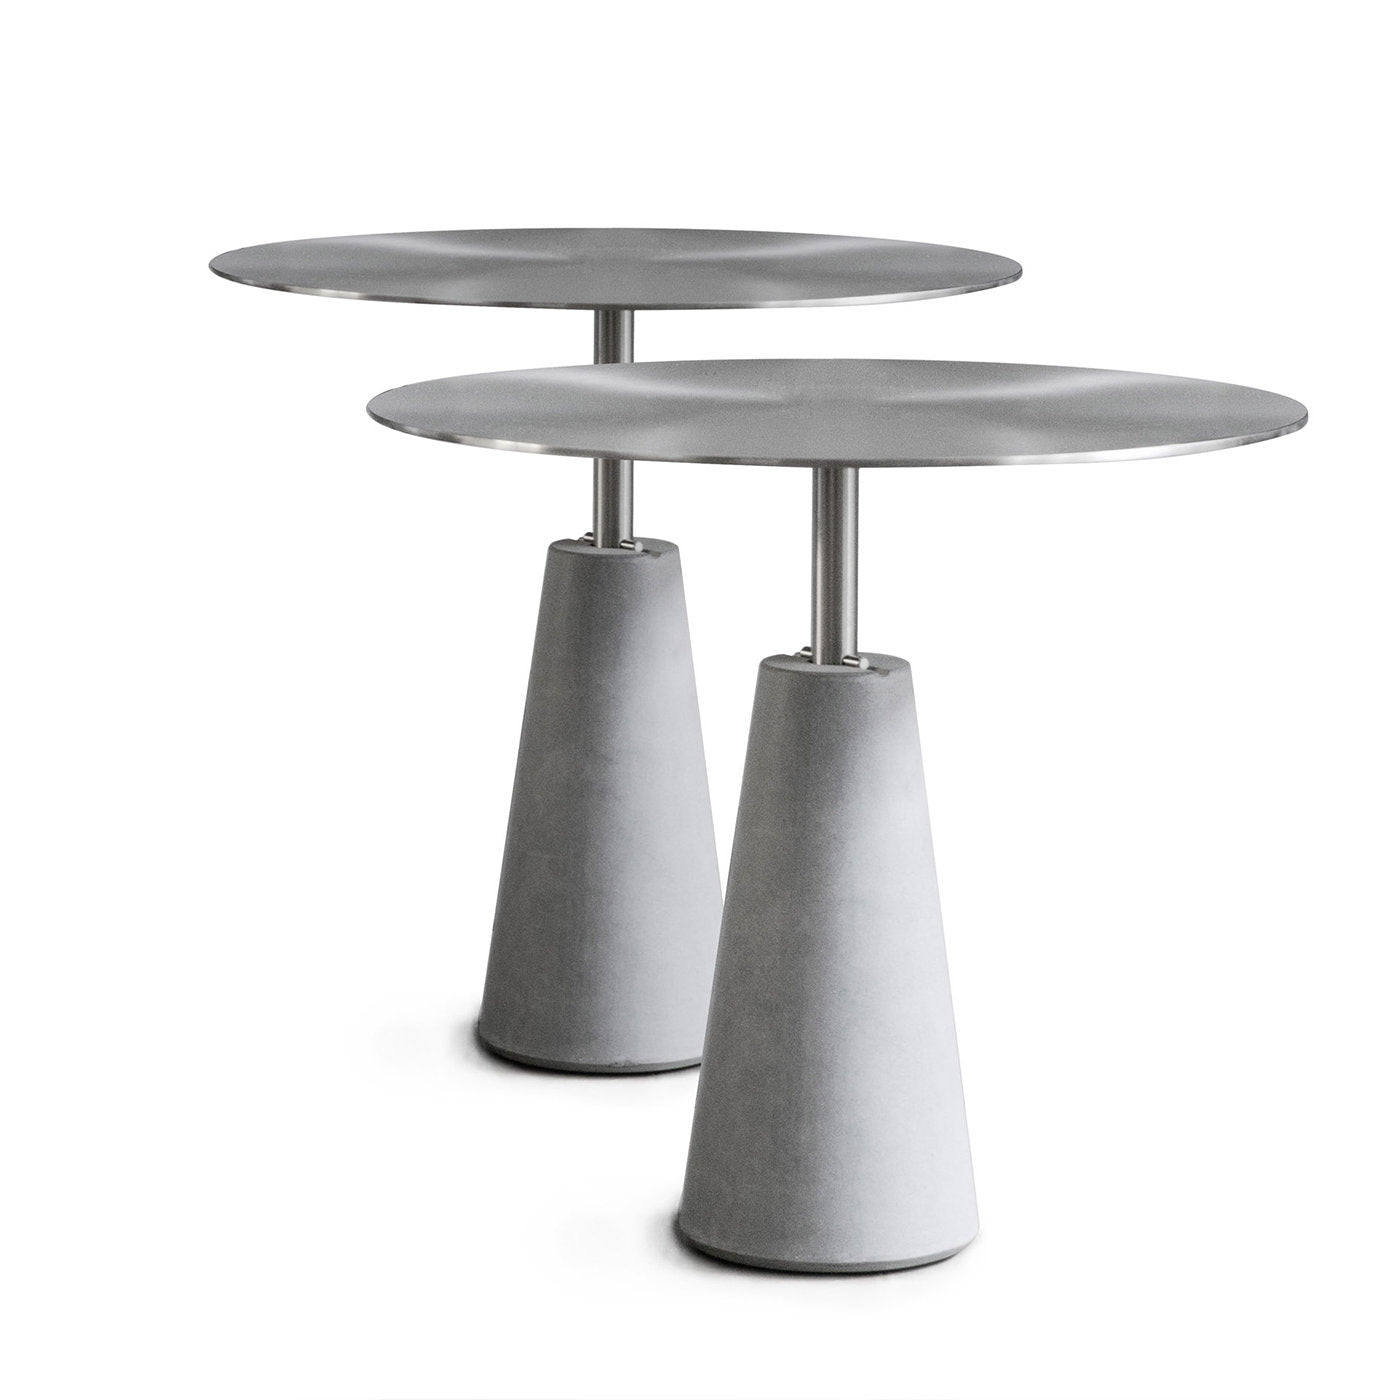 Ed004 Steel and White Stone Side Table - Alternative view 1